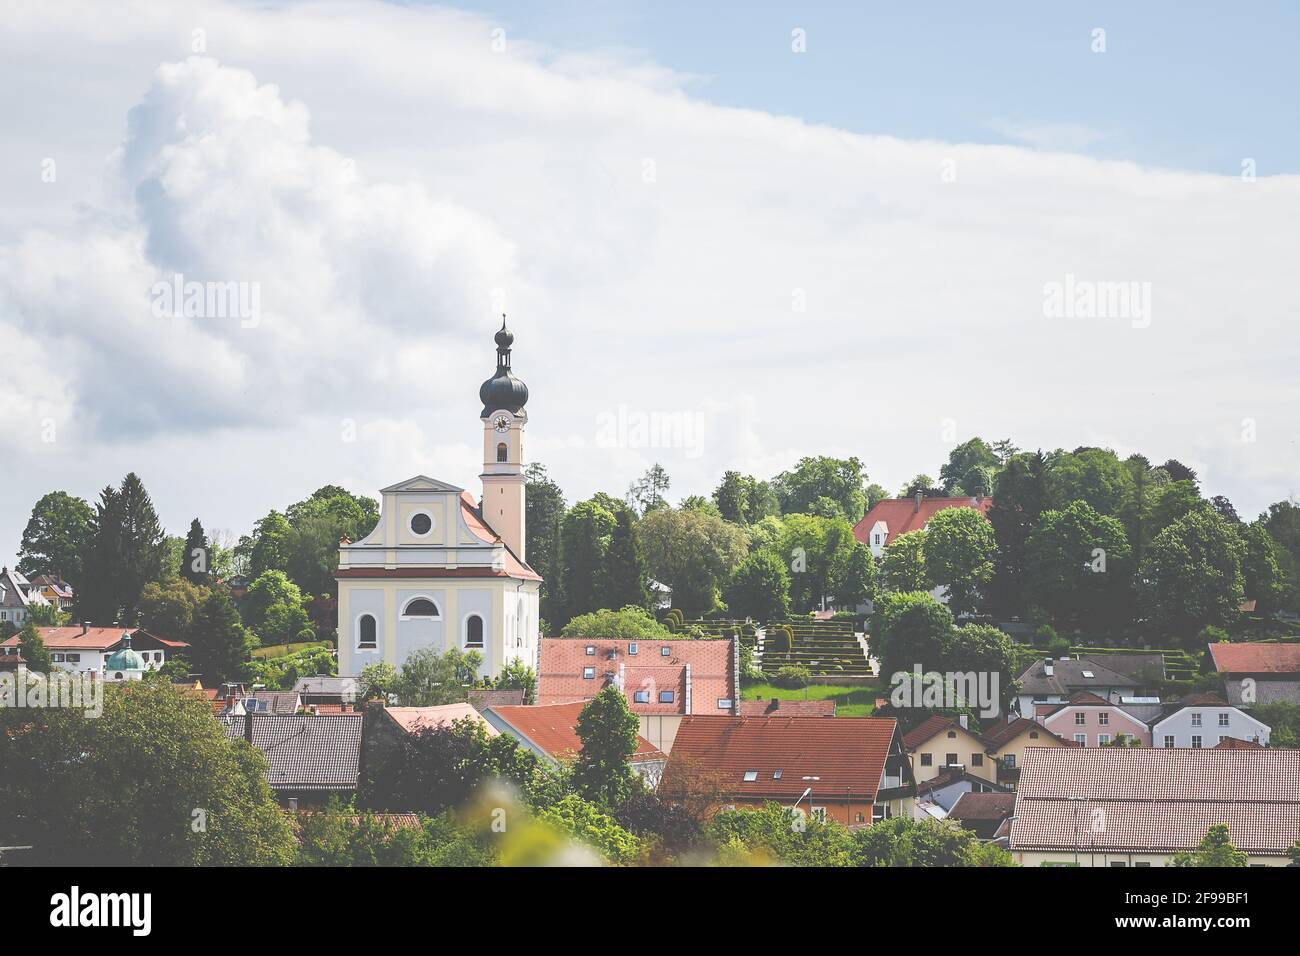 Markt Murnau - View of the town with the Church of St. Nicholas in the Blue Land Stock Photo